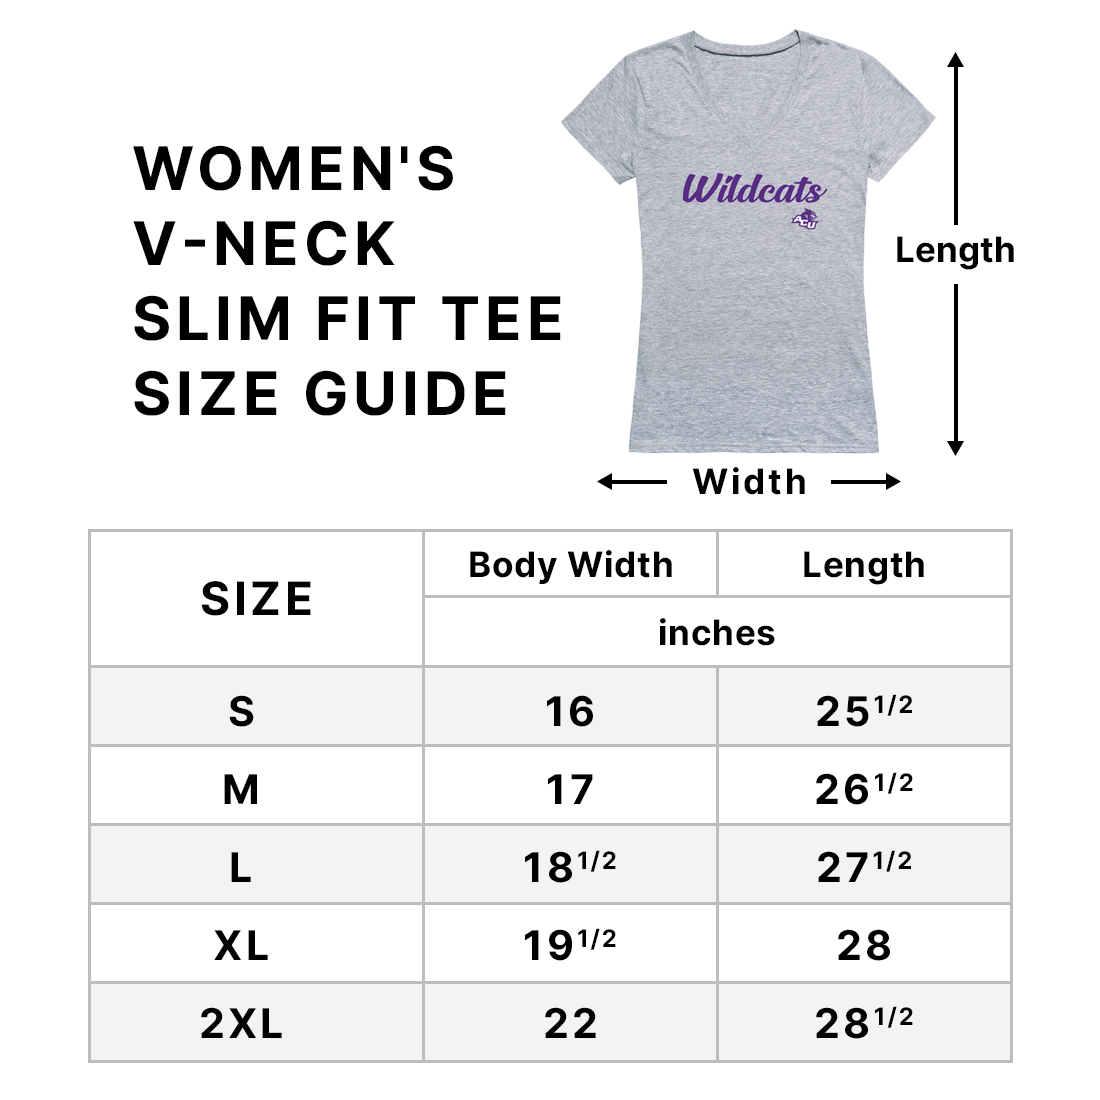 How To Find What Size T-Shirts Will Fit Your Group